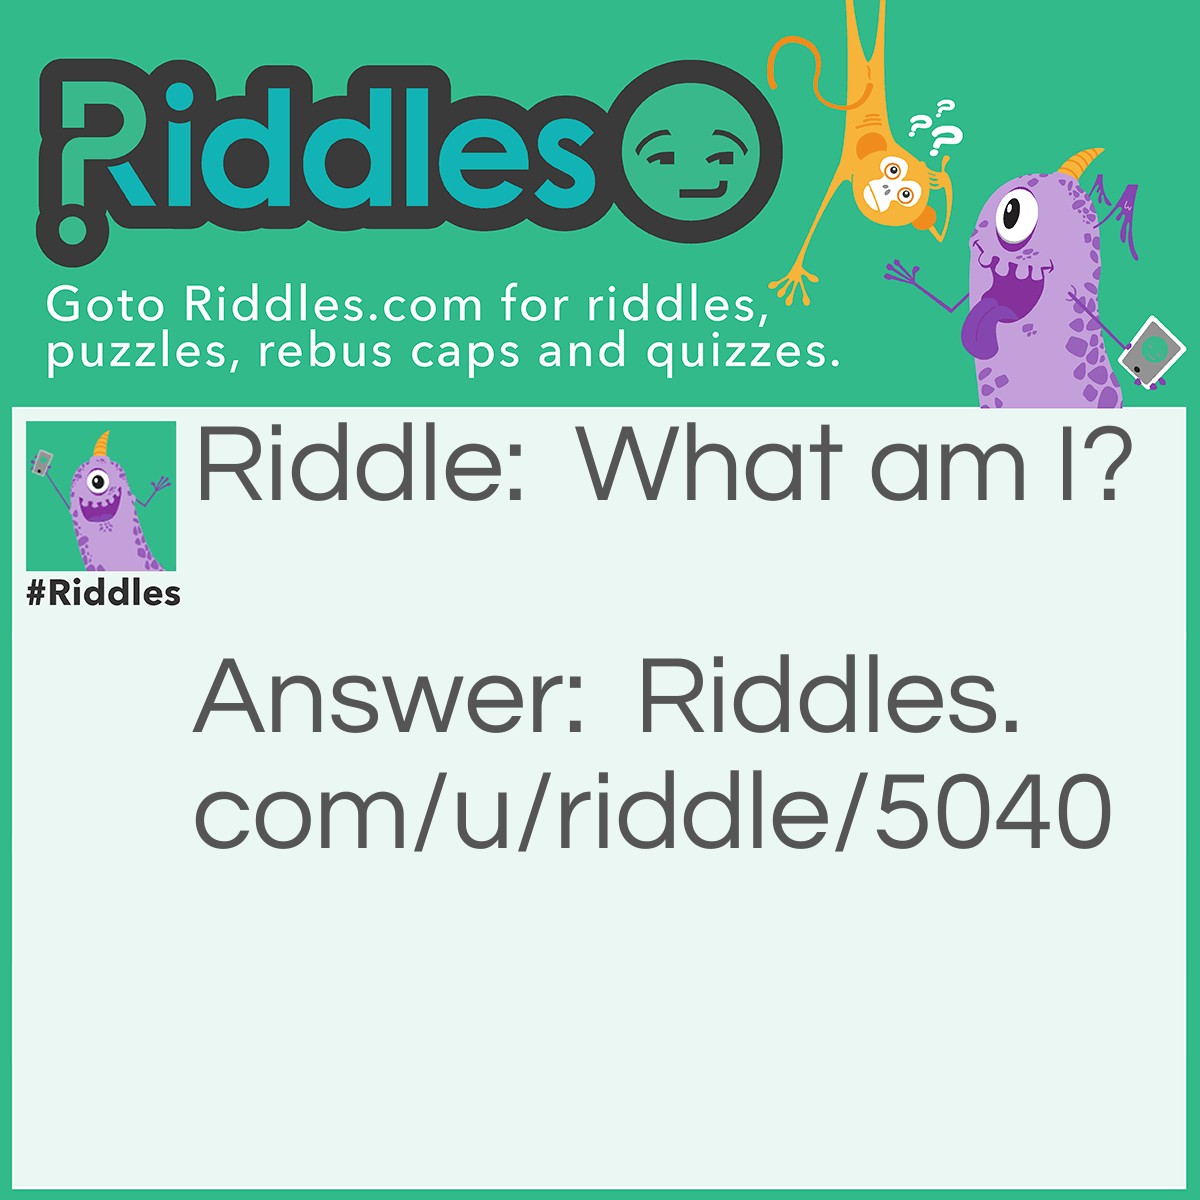 Riddle: What am I? Answer: A question that you have to answer!